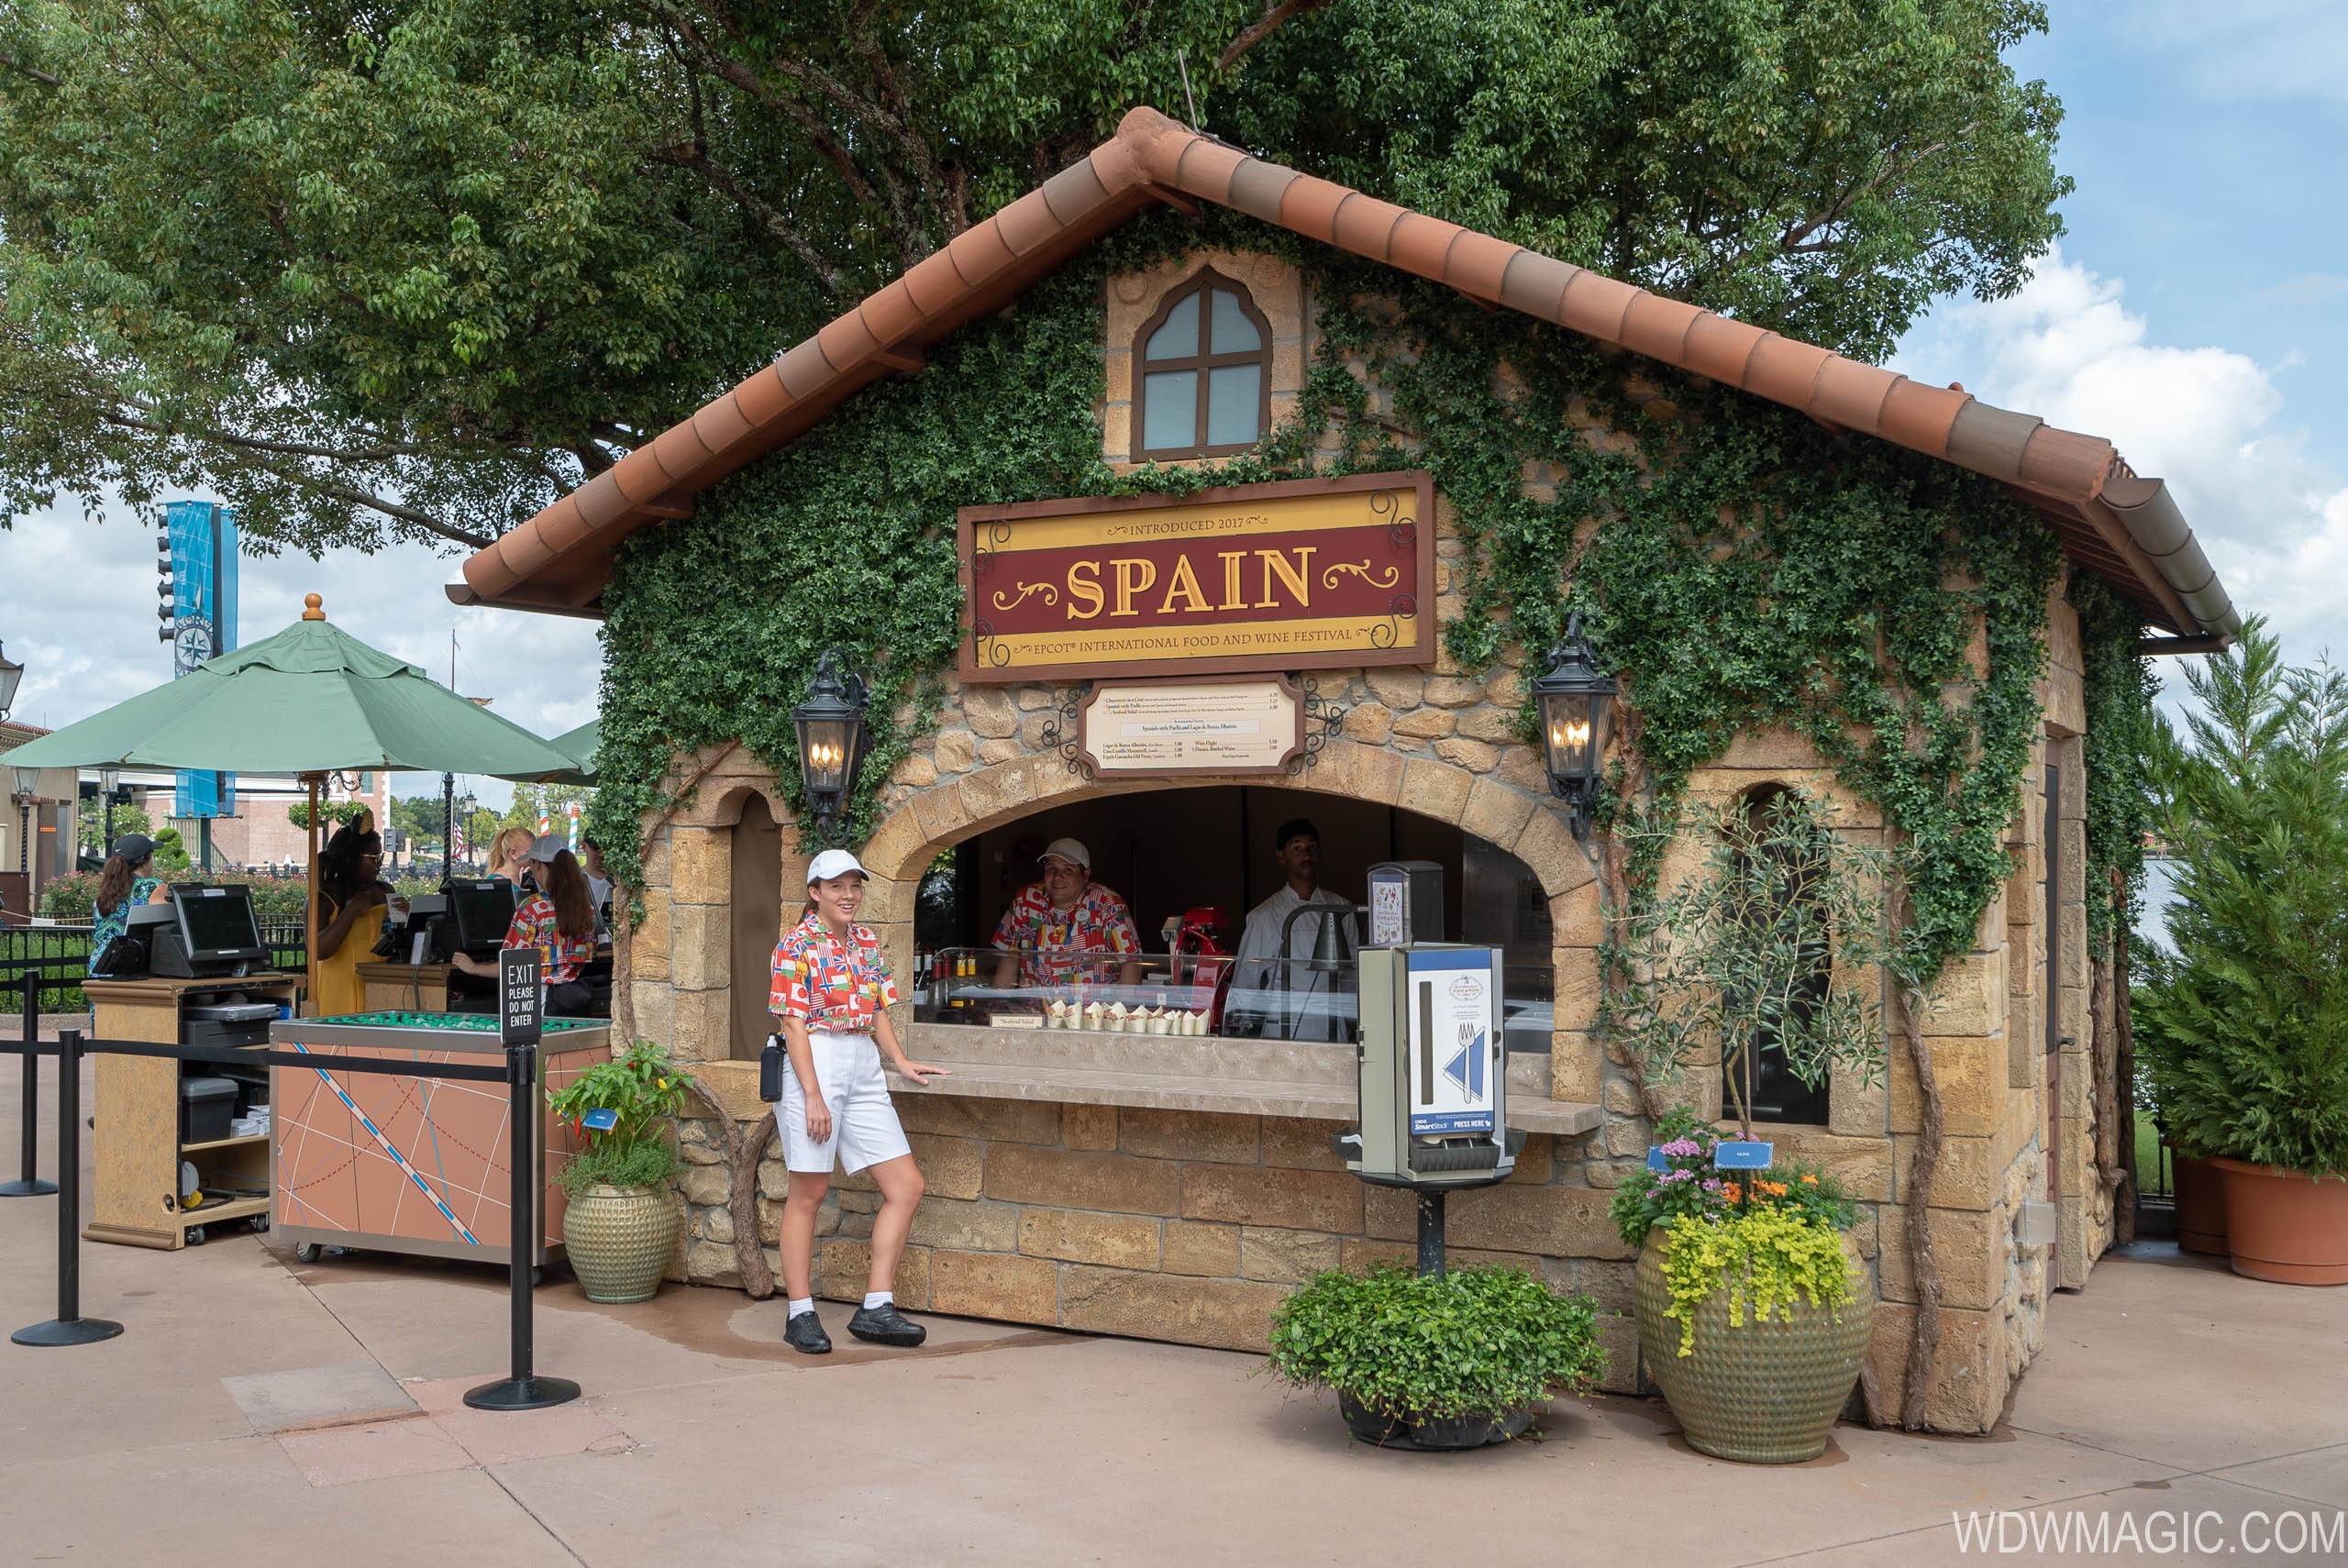 Spain at the Epcot Food and Wine Festival